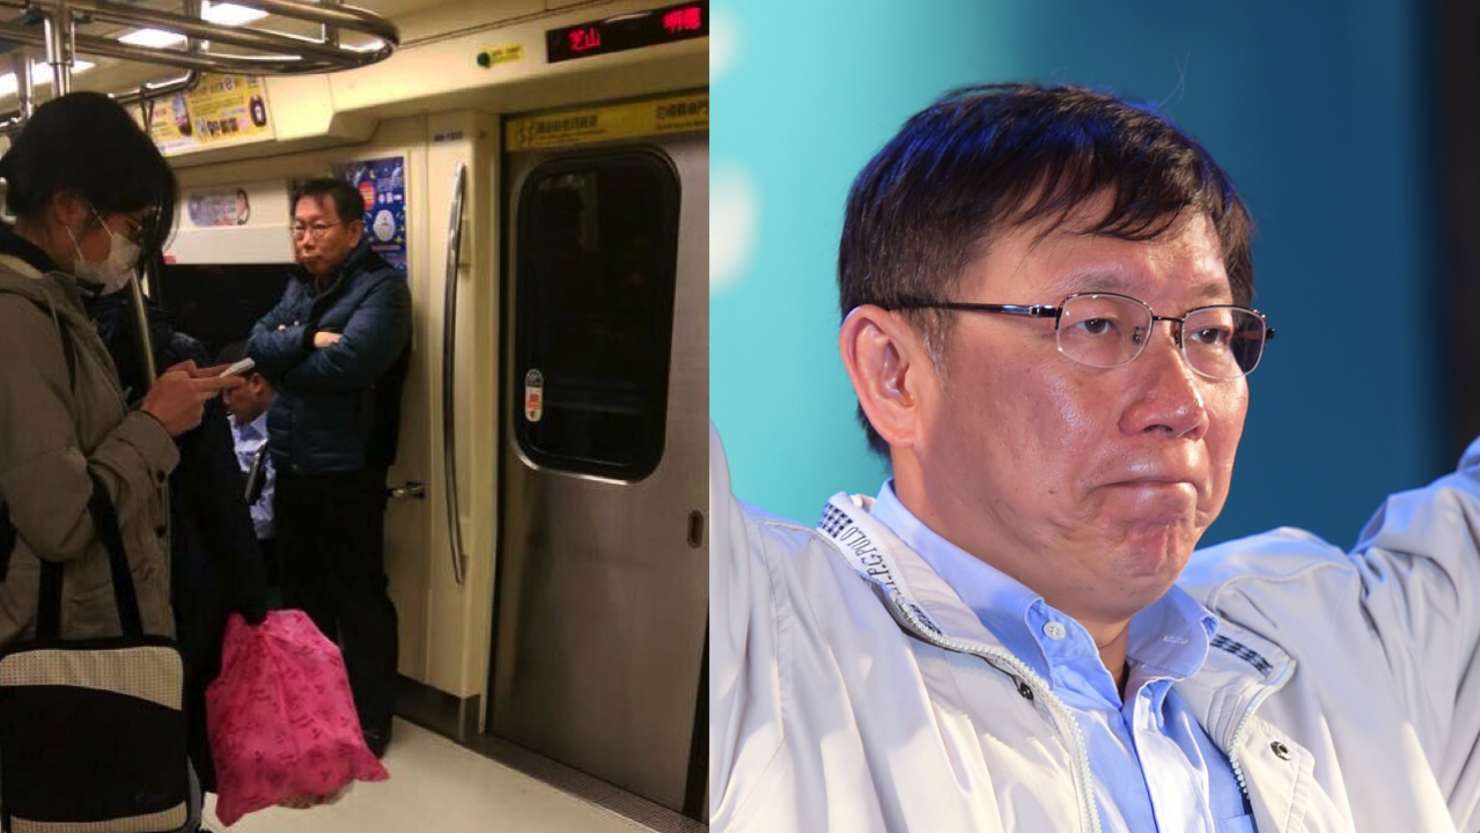 In this viral photo (left) posted to Facebook by Yu Yen Huang, Taipei's new mayor Ko Wen-je is seen standing alone aboard a subway train. "It's definitely unusual for a politician to do like this," Yu told CNN. "Normally they go out with luxury cars, several body guards."